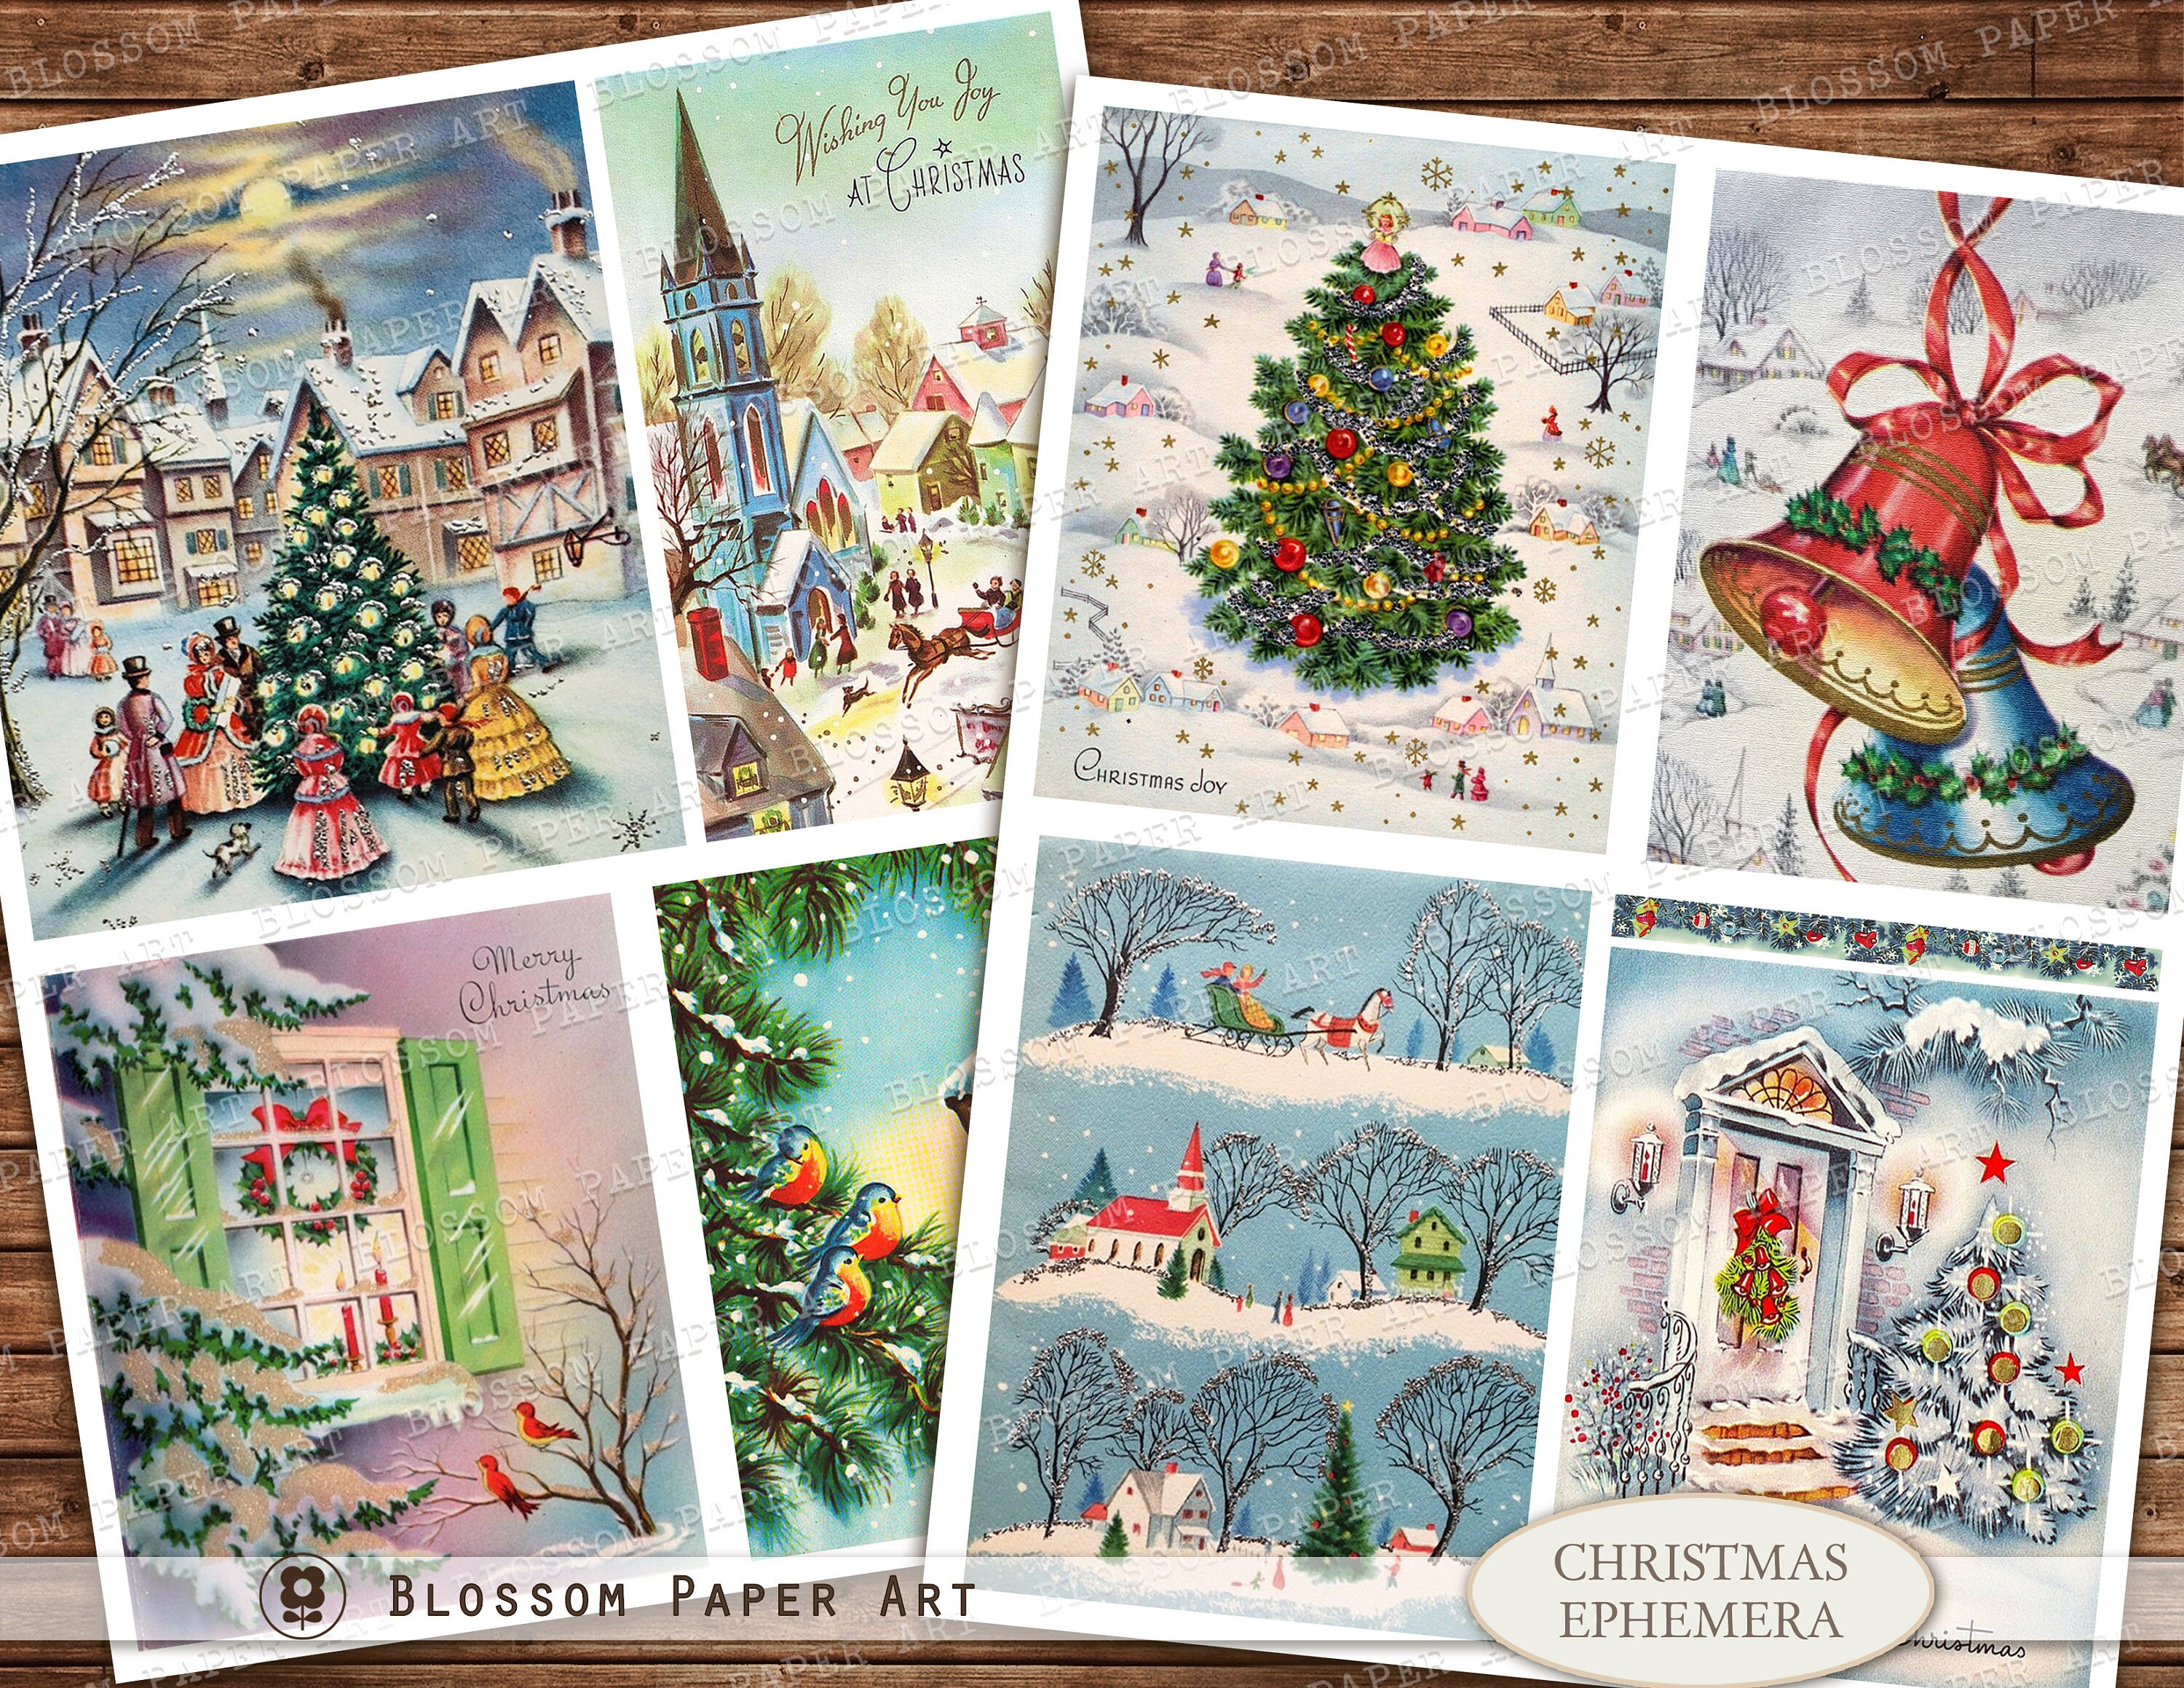 Vintage Christmas Ephemera Book: 500+ Christmas Vintage Ephemera Images,  Tags, Cards Pockets & More For Cut Out, Junk Journals, Collage, Or